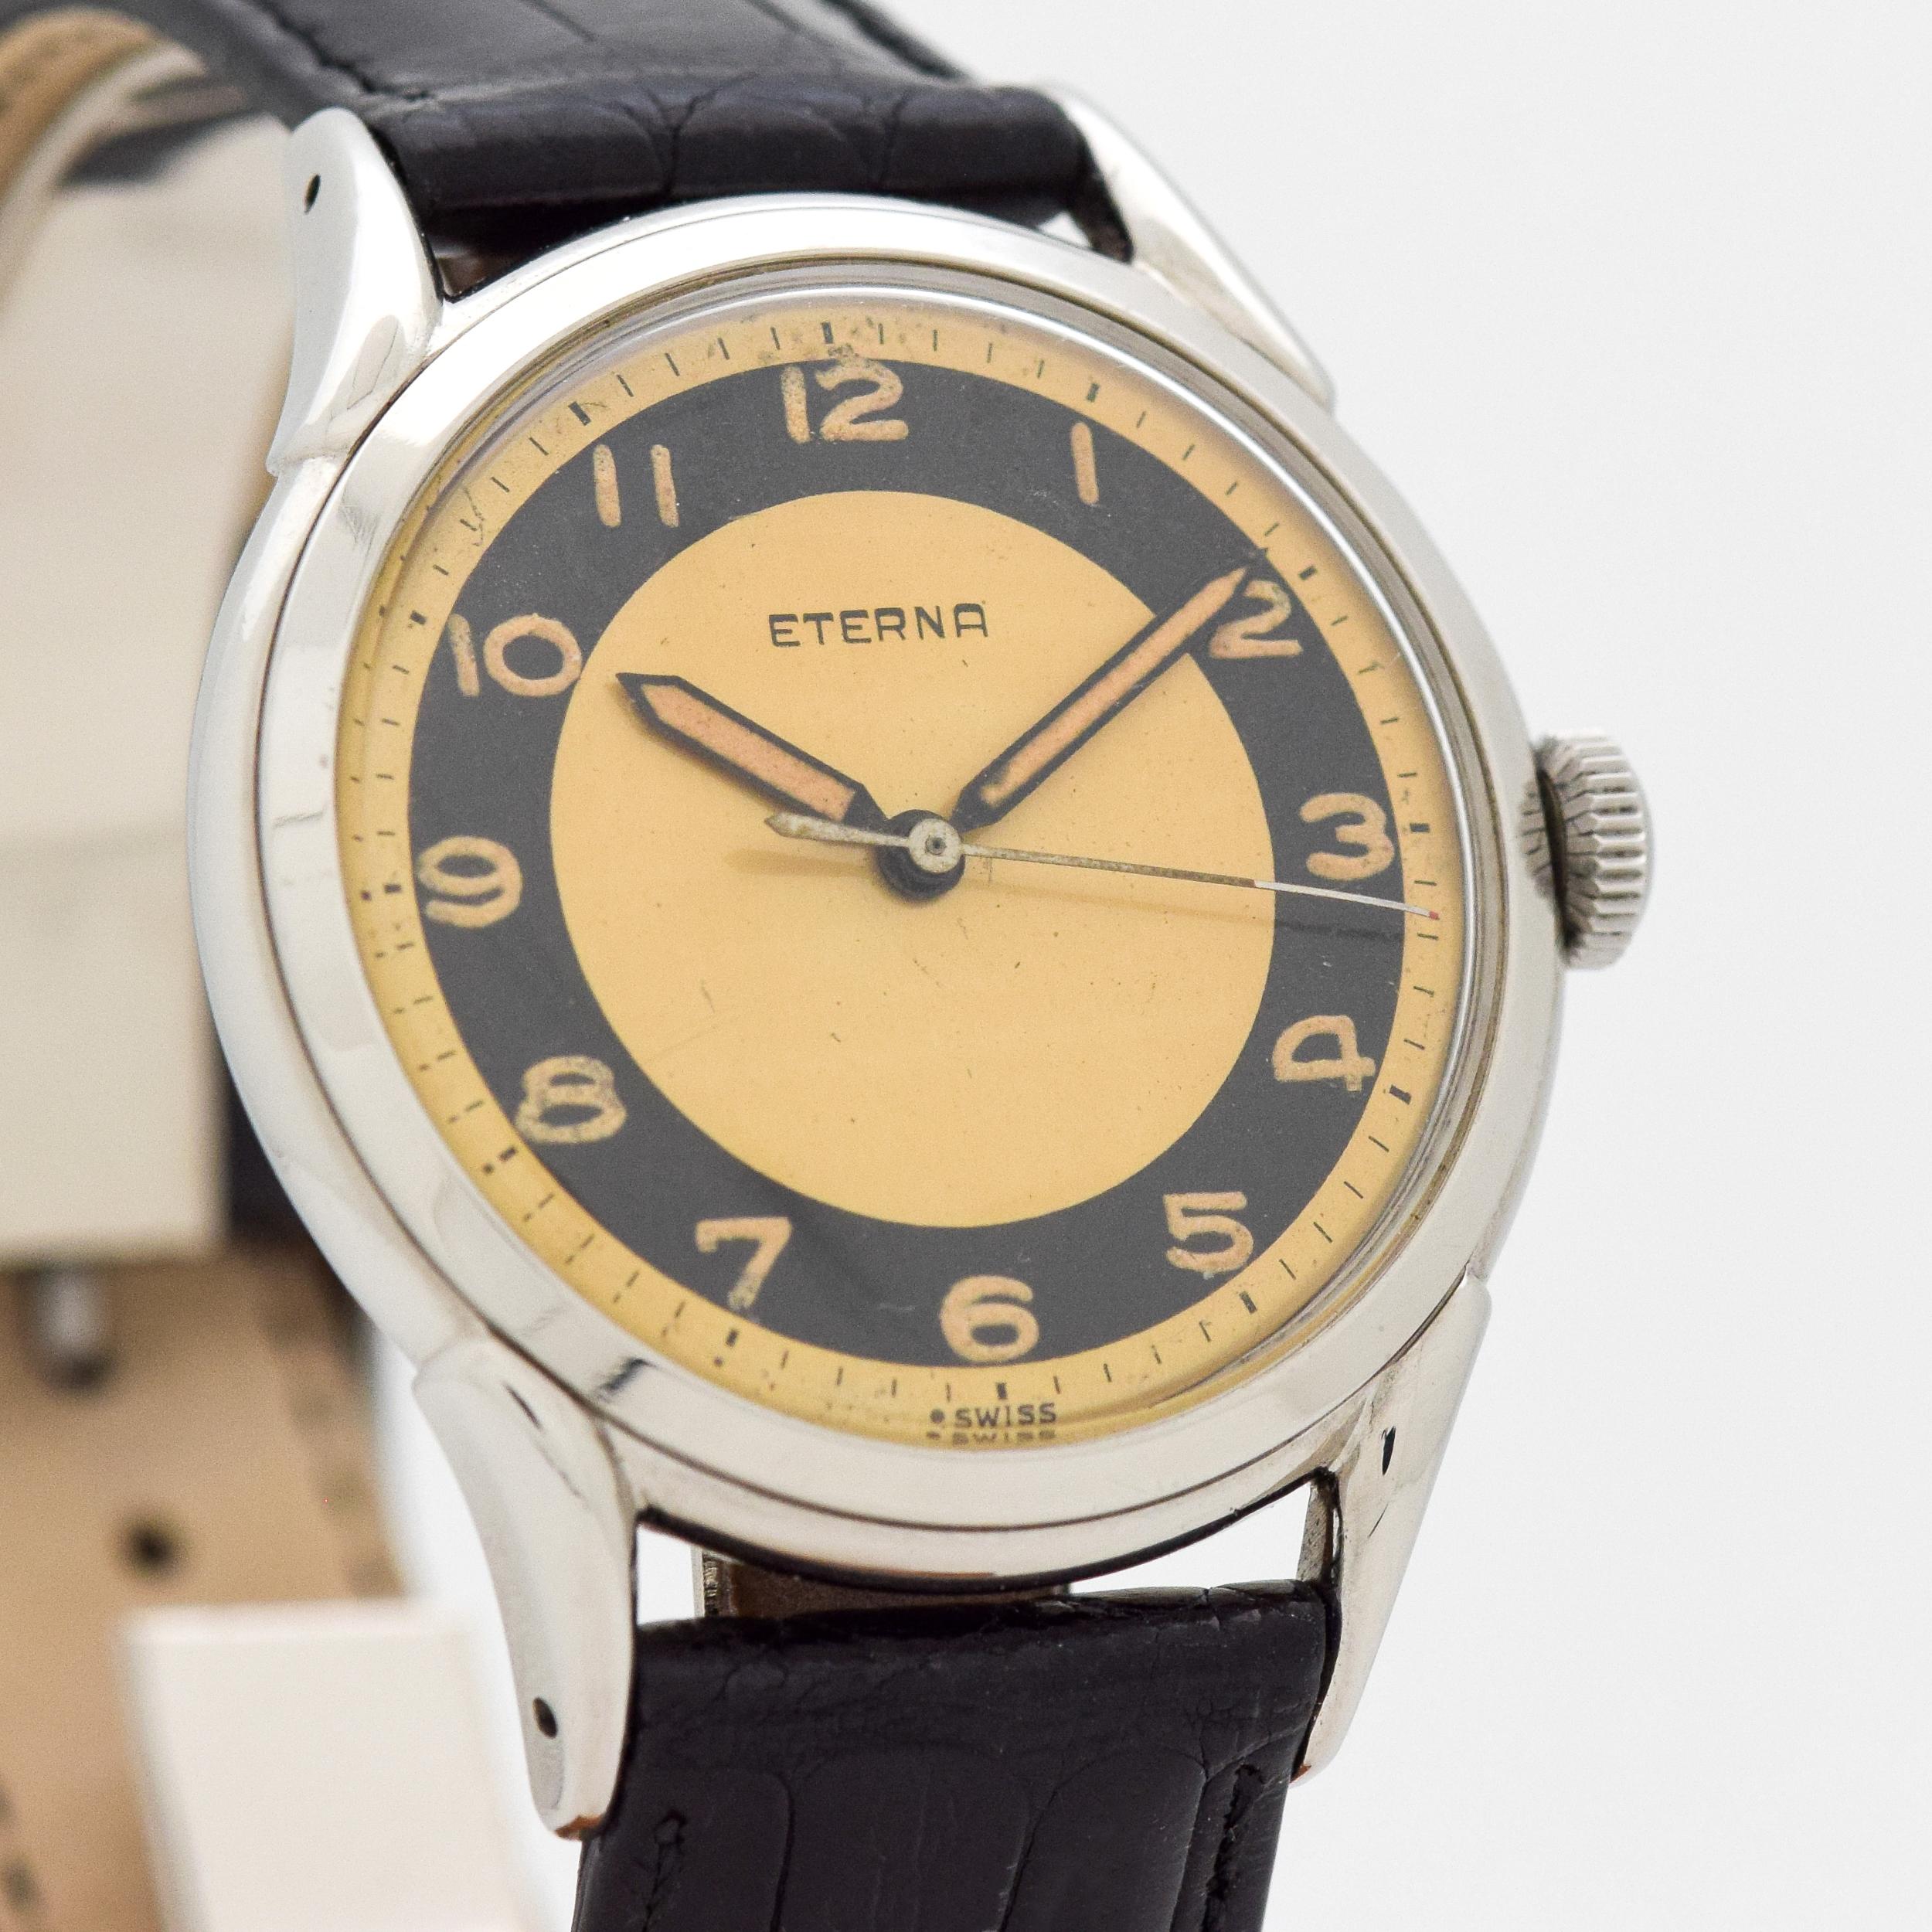 1950's Vintage Eterna Stainless Steel watch with Original Two Tone Black and Gold Dial with Arabic Numbers. 36mm x 43mm lug to lug (1.42 in. x 1.69 in.) - 15 jewel, manual caliber movement. Triple Signed.